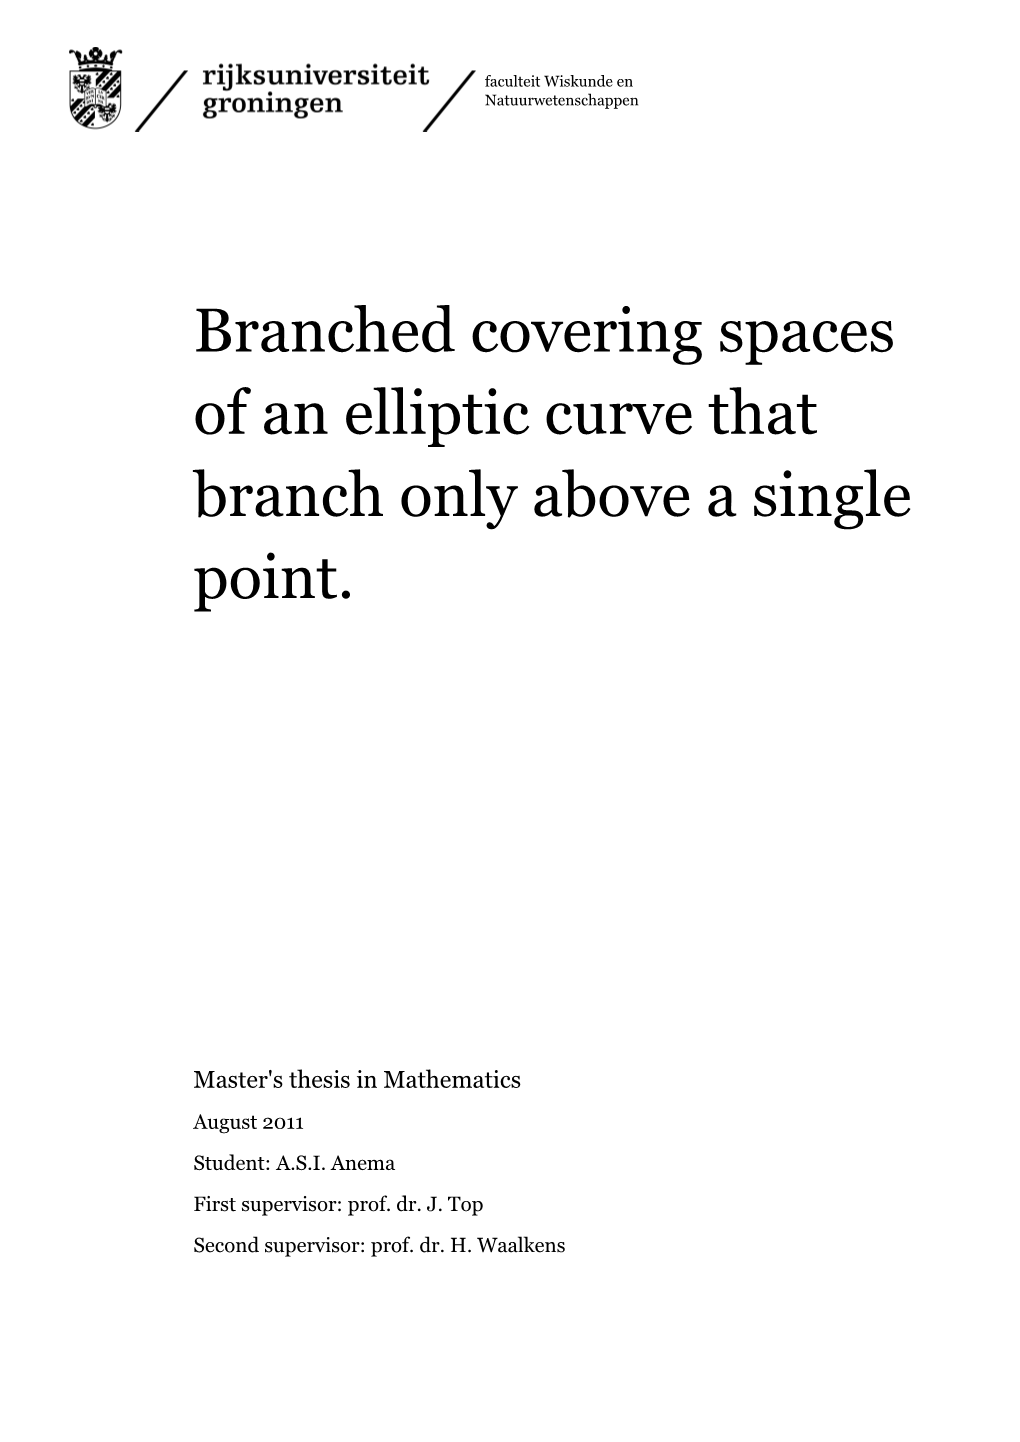 Branched Covering Spaces of an Elliptic Curve That Branch Only Above a Single Point